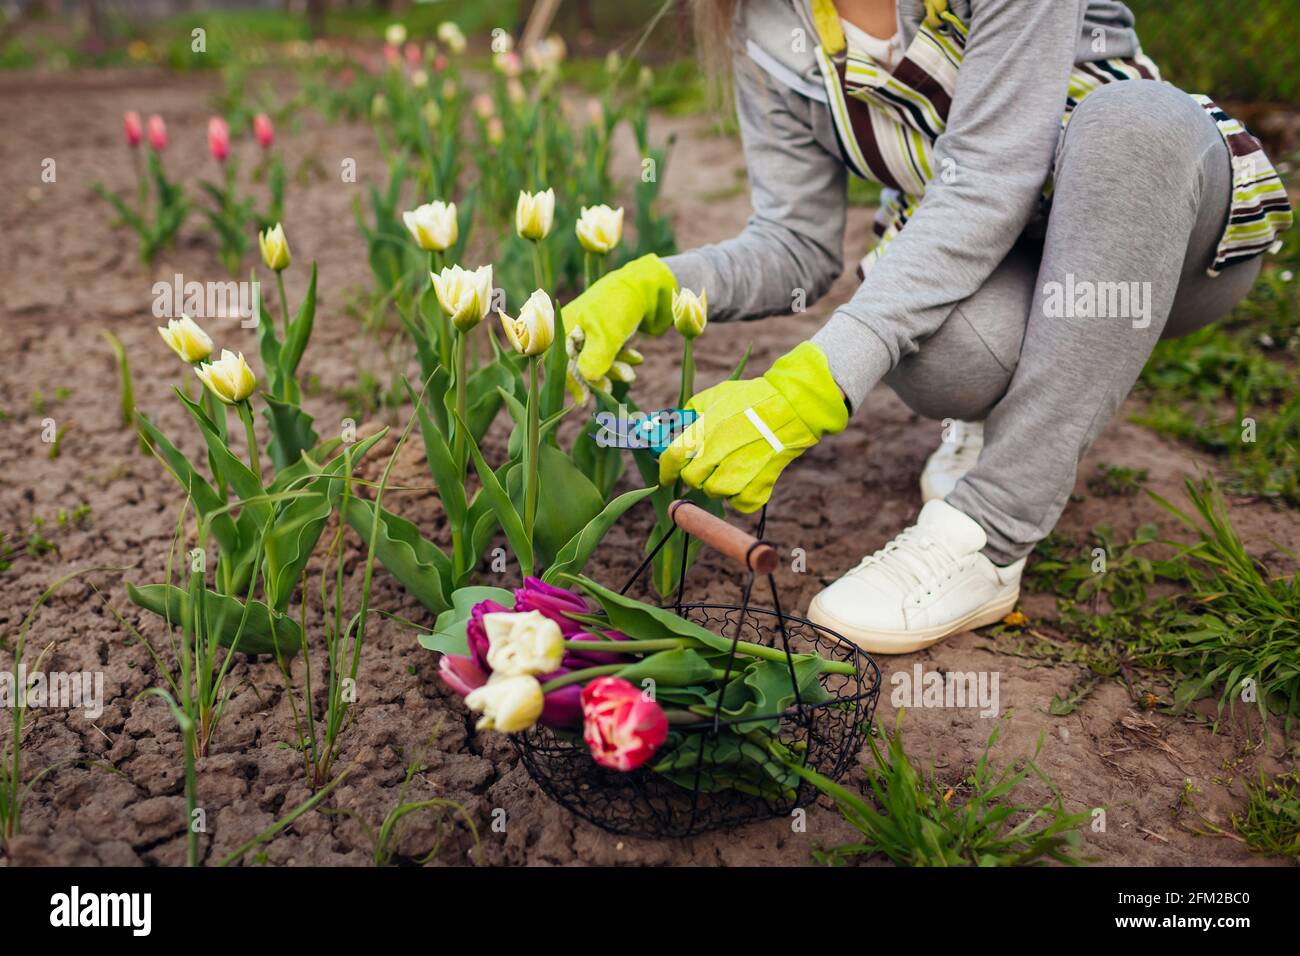 Gardener picking white tulips in spring garden. Woman cuts flowers off with secateurs picking them in basket Stock Photo